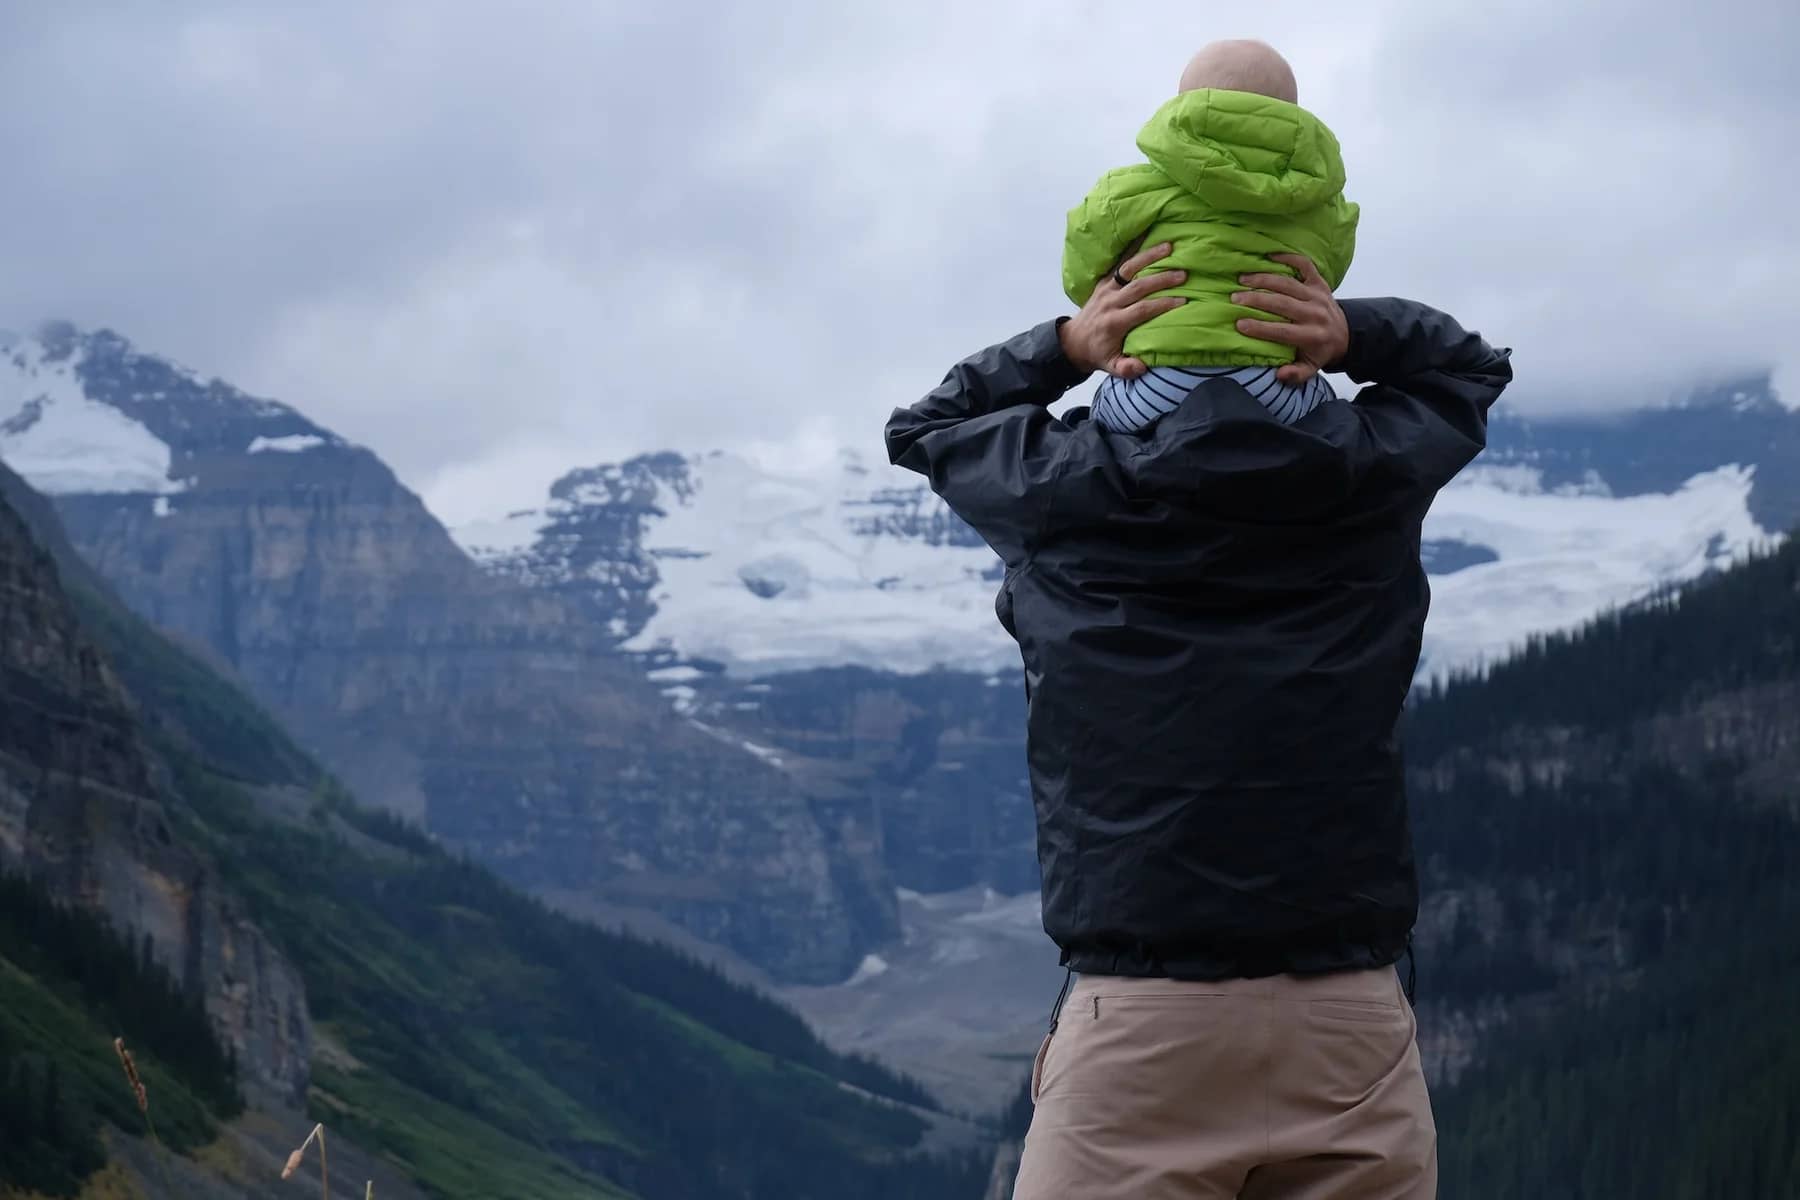 Image of Dad and toddler looking at mountains to convey RVing with babies and toddlers